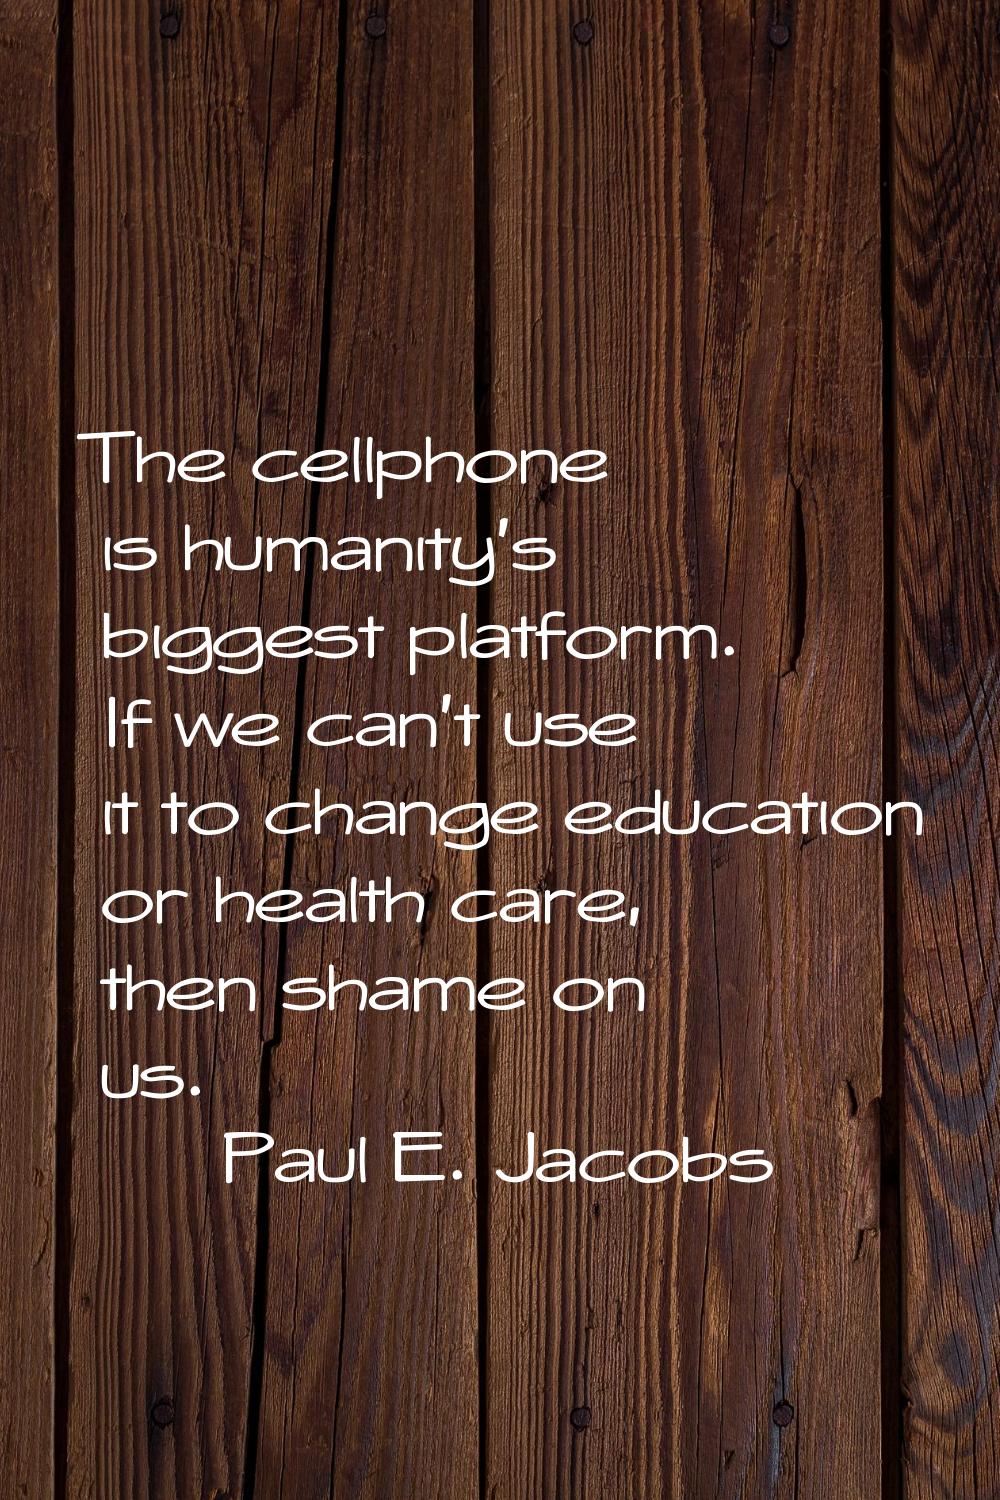 The cellphone is humanity's biggest platform. If we can't use it to change education or health care